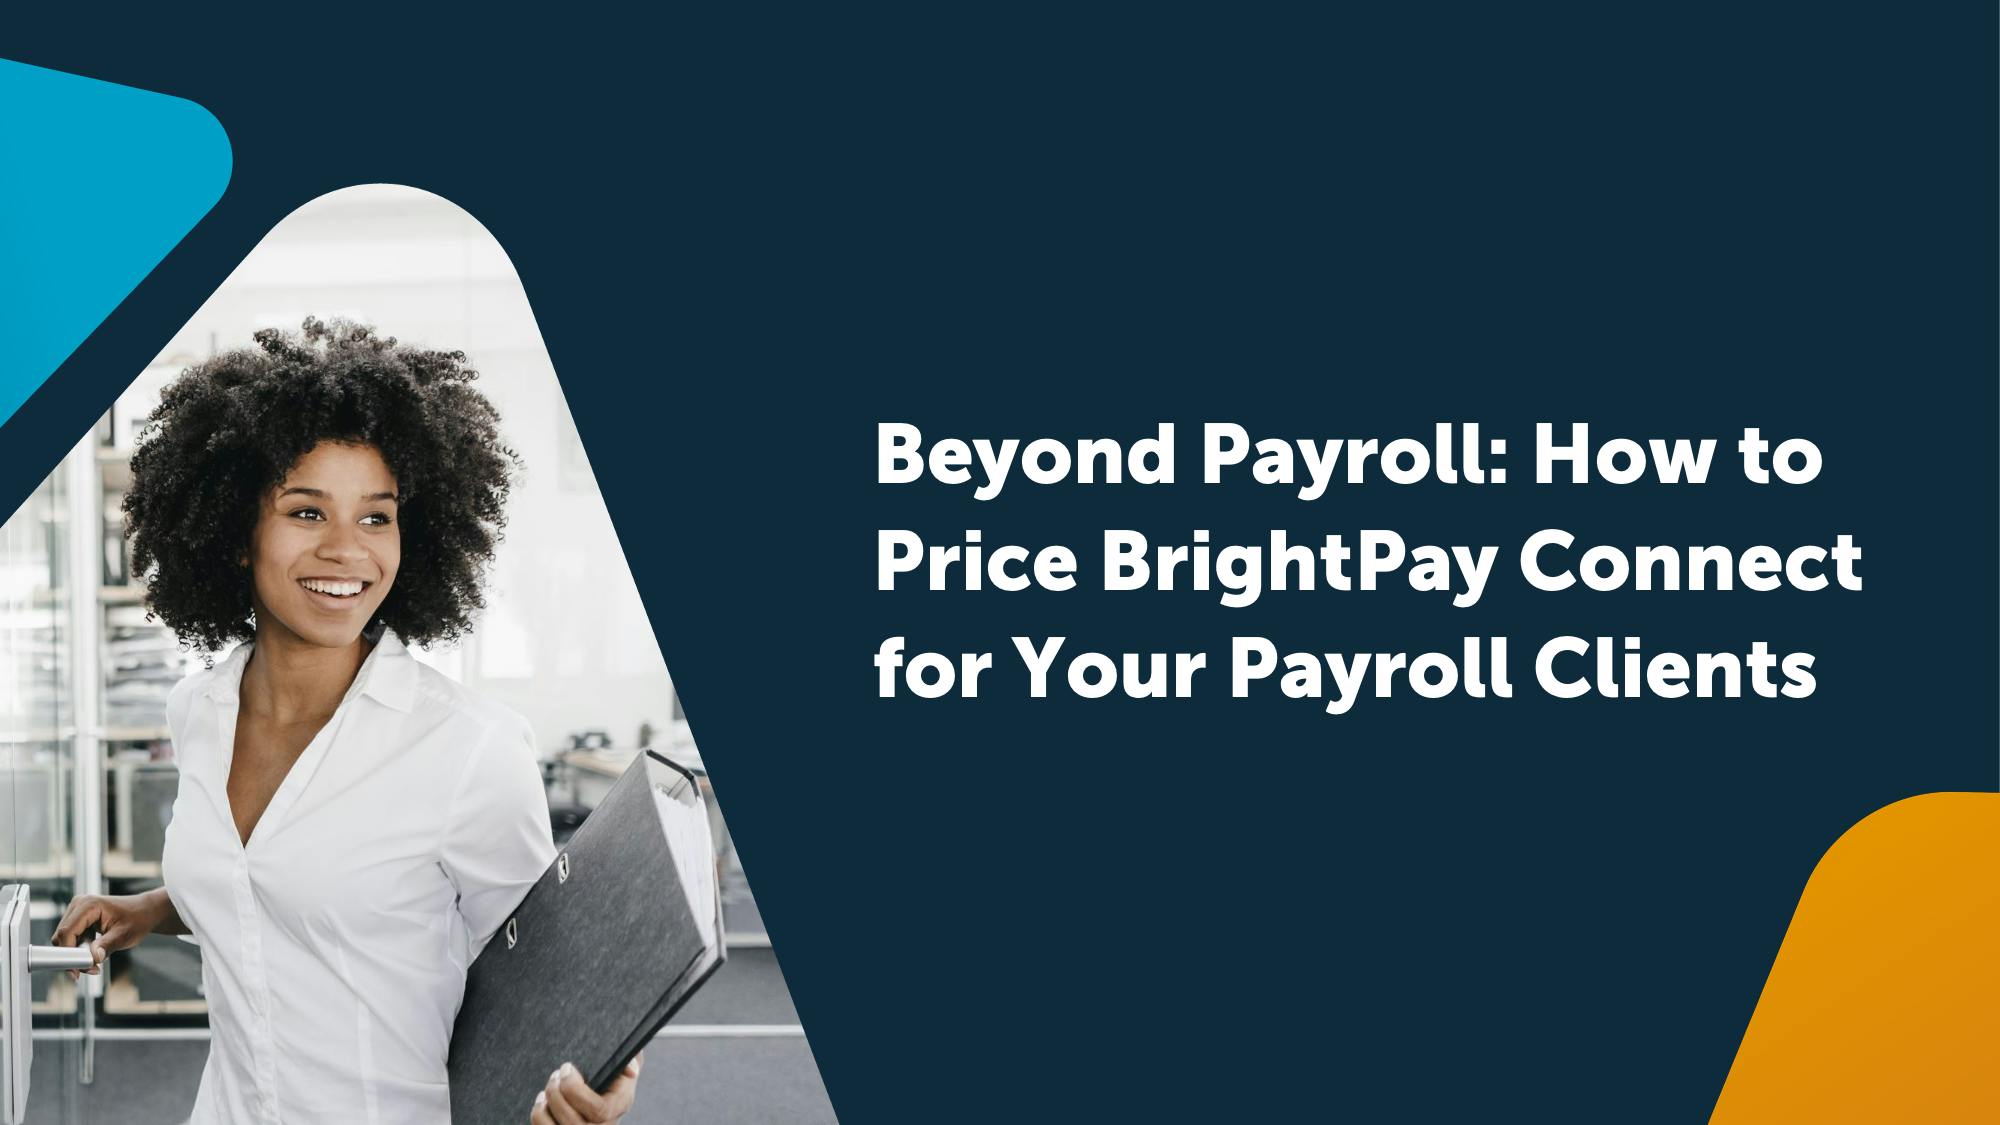 Beyond Payroll: How to Price BrightPay Connect for Your Payroll Clients